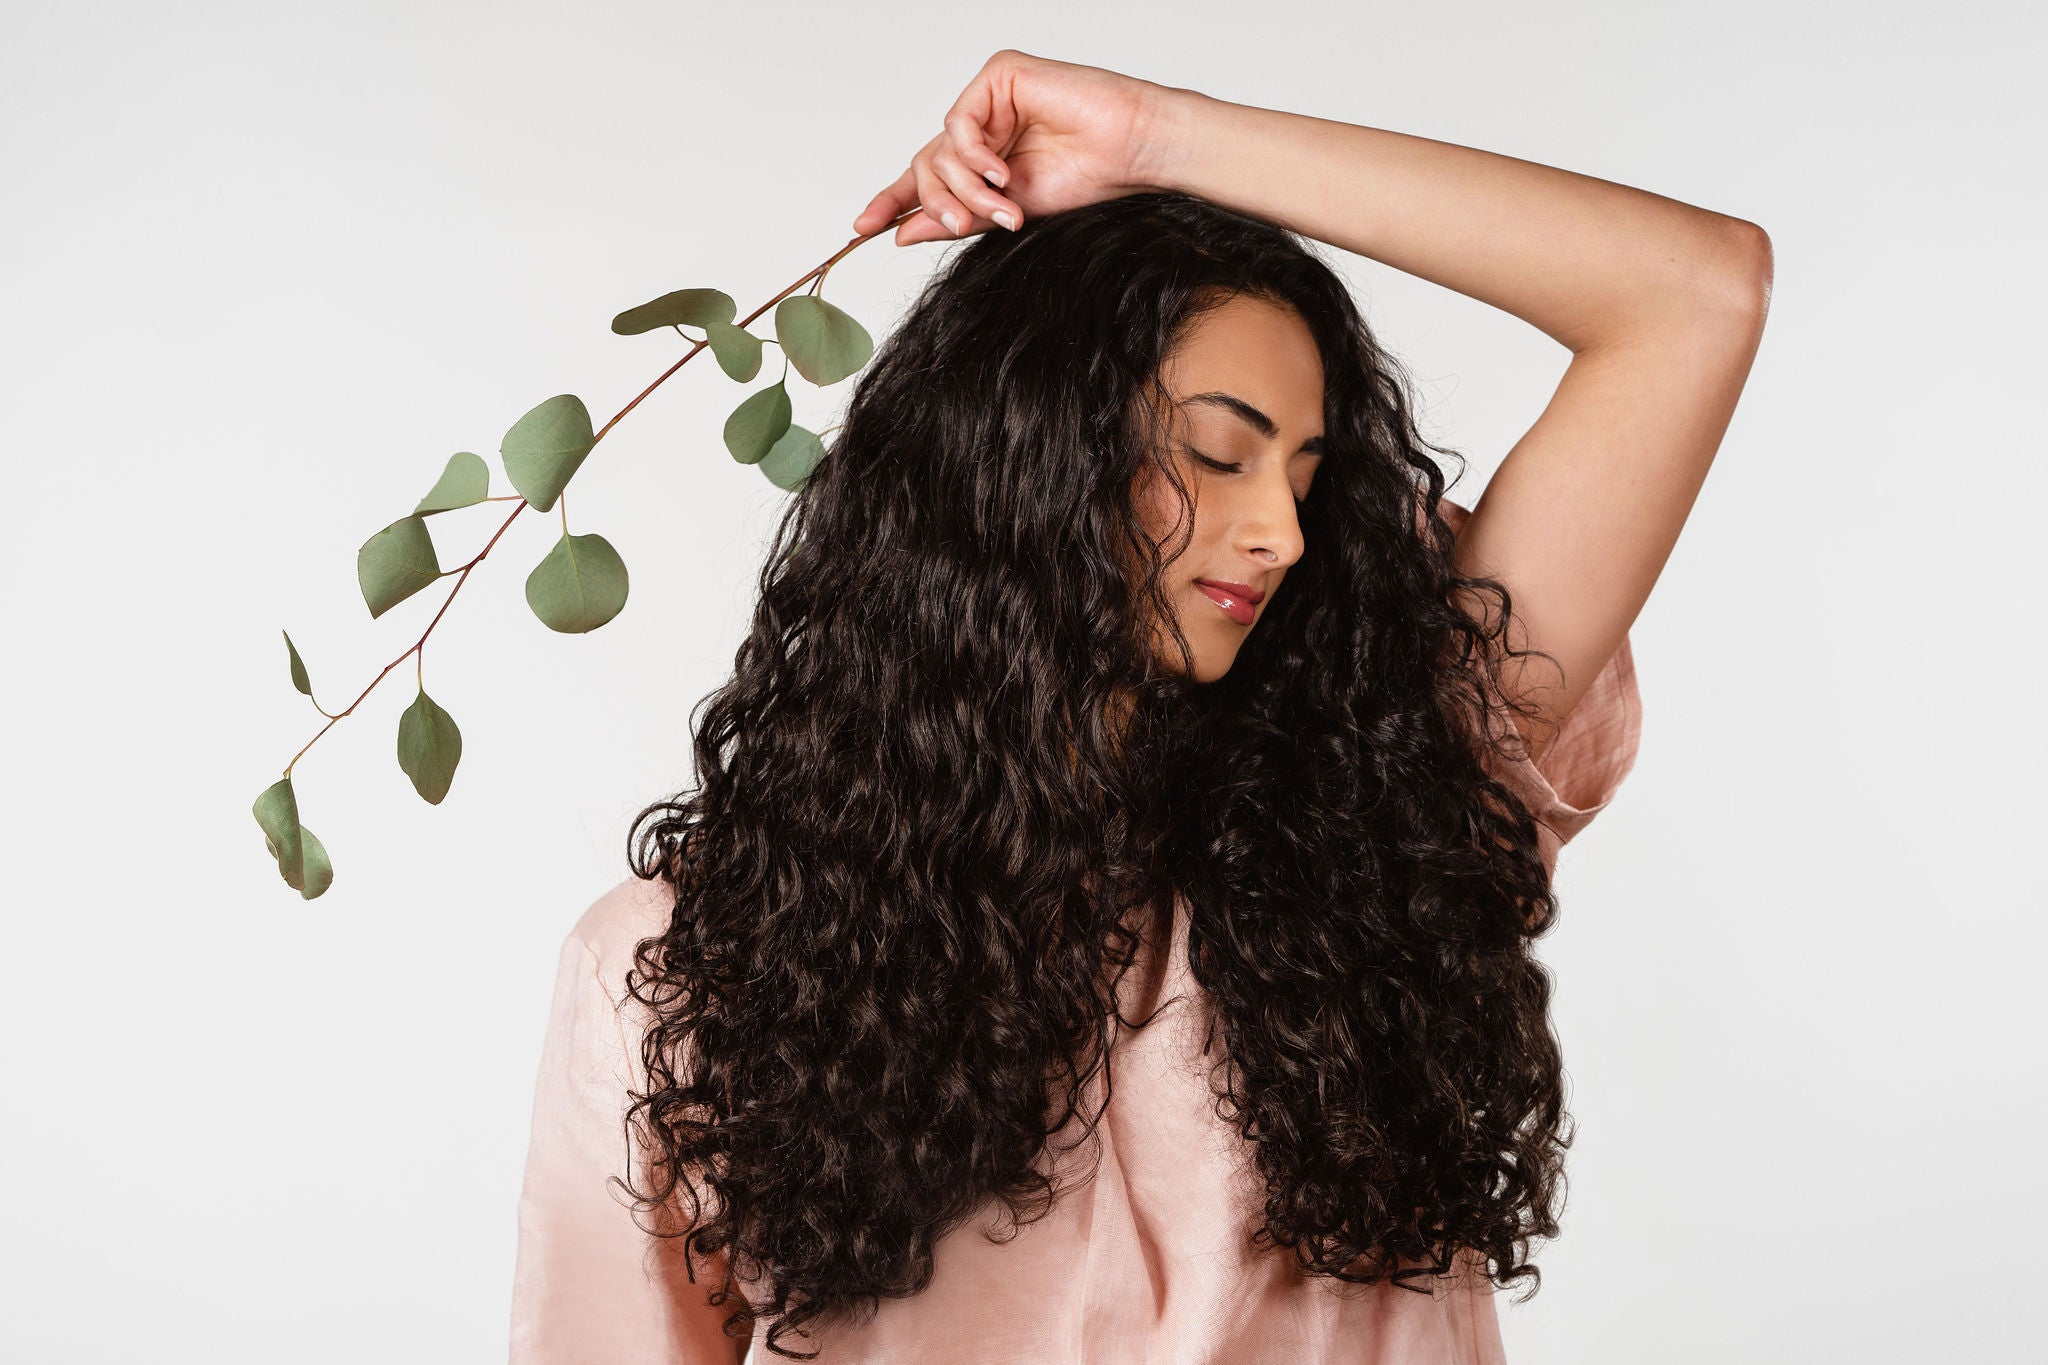 A woman with long healthy curls turned to the side, with a plant behind her